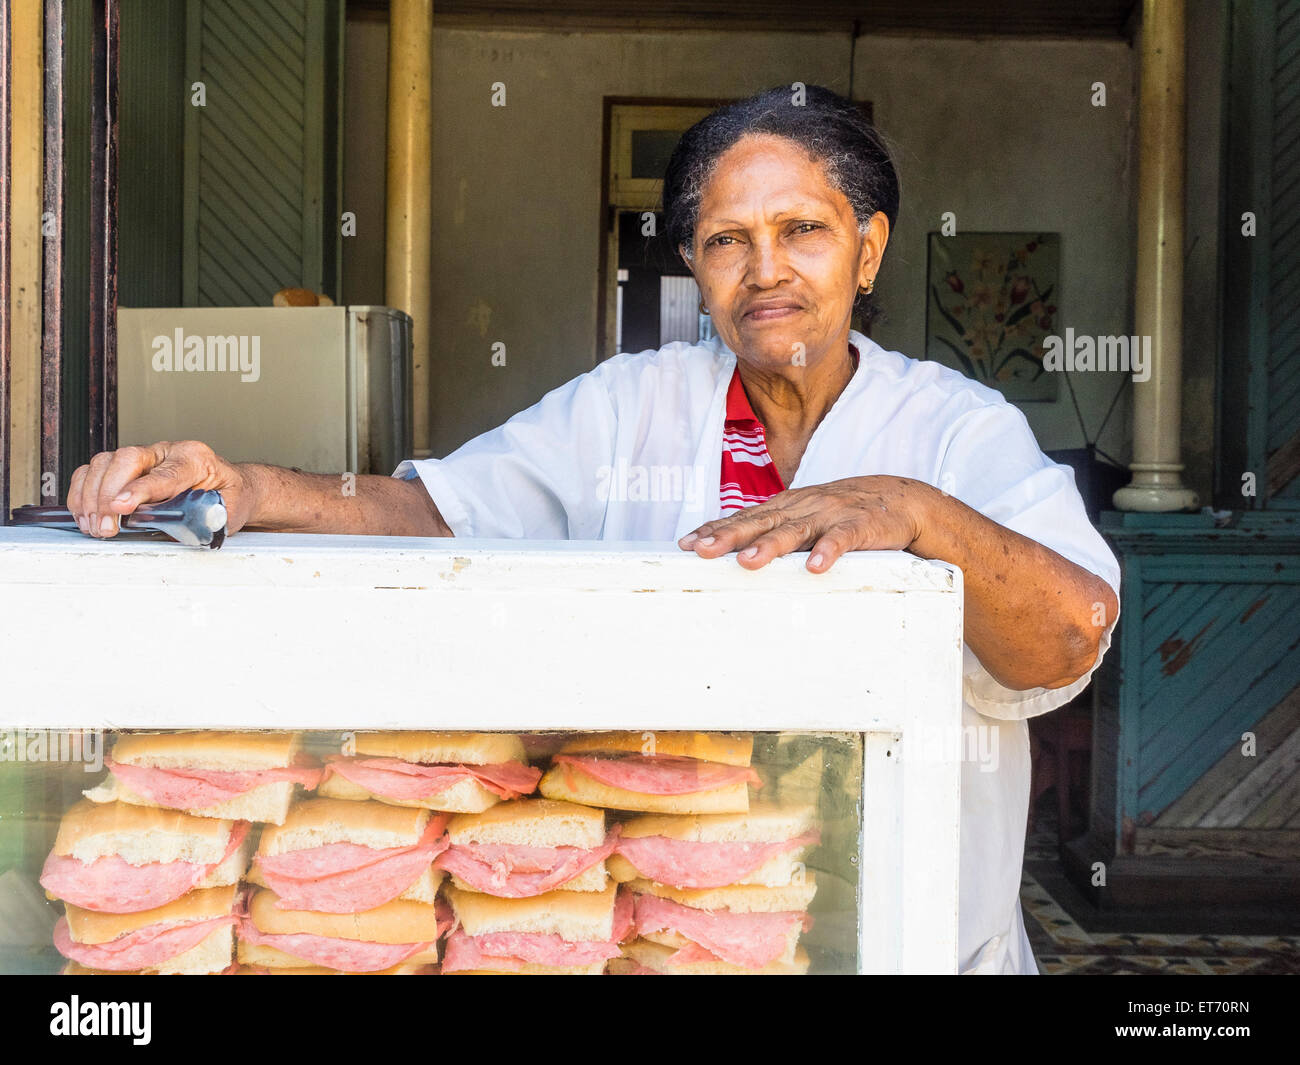 A older Afro-Cuban female sandwich vendor leans on her display case holding sandwiches and other foods while holding tongs. Stock Photo